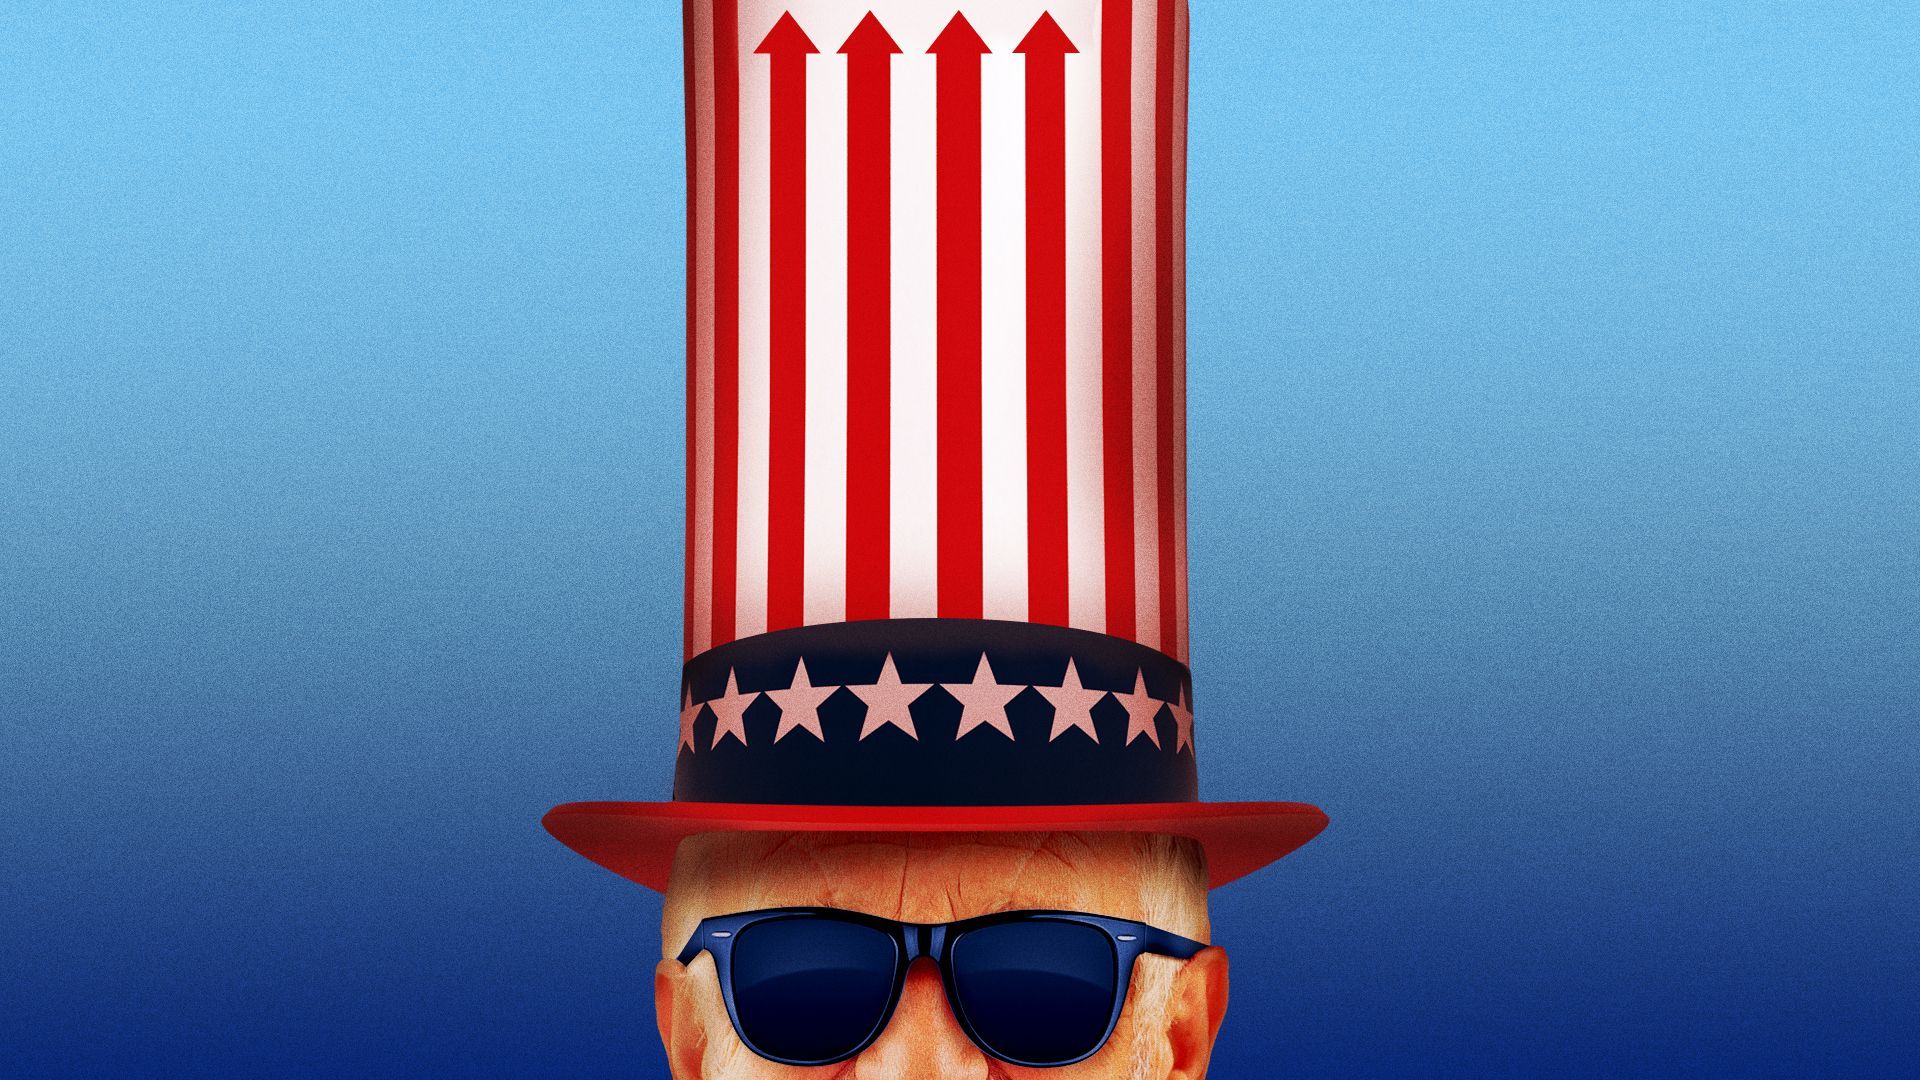 Illustration of Uncle Sam wearing sunglasses and wearing a hat with stripes forming upward arrows.